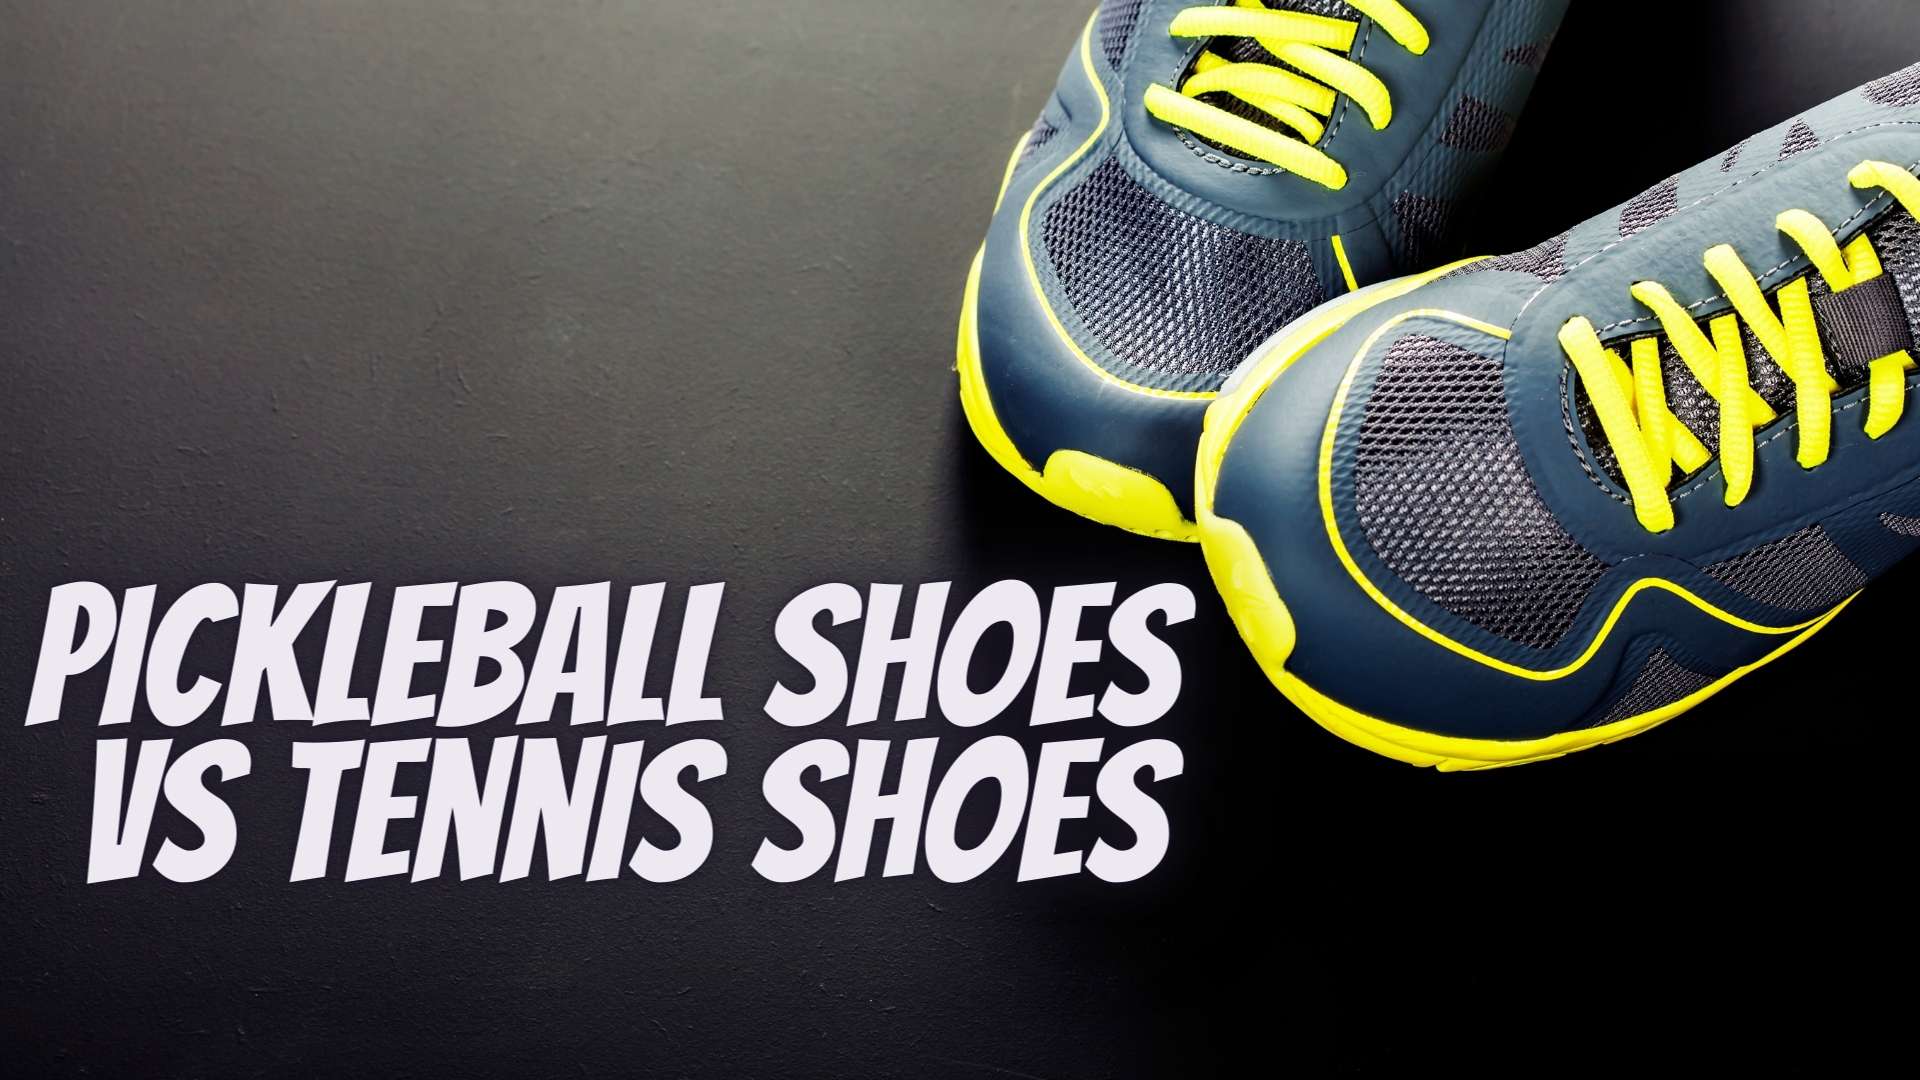 Pickleball Shoes Vs Tennis Shoes: Differences and Similarities